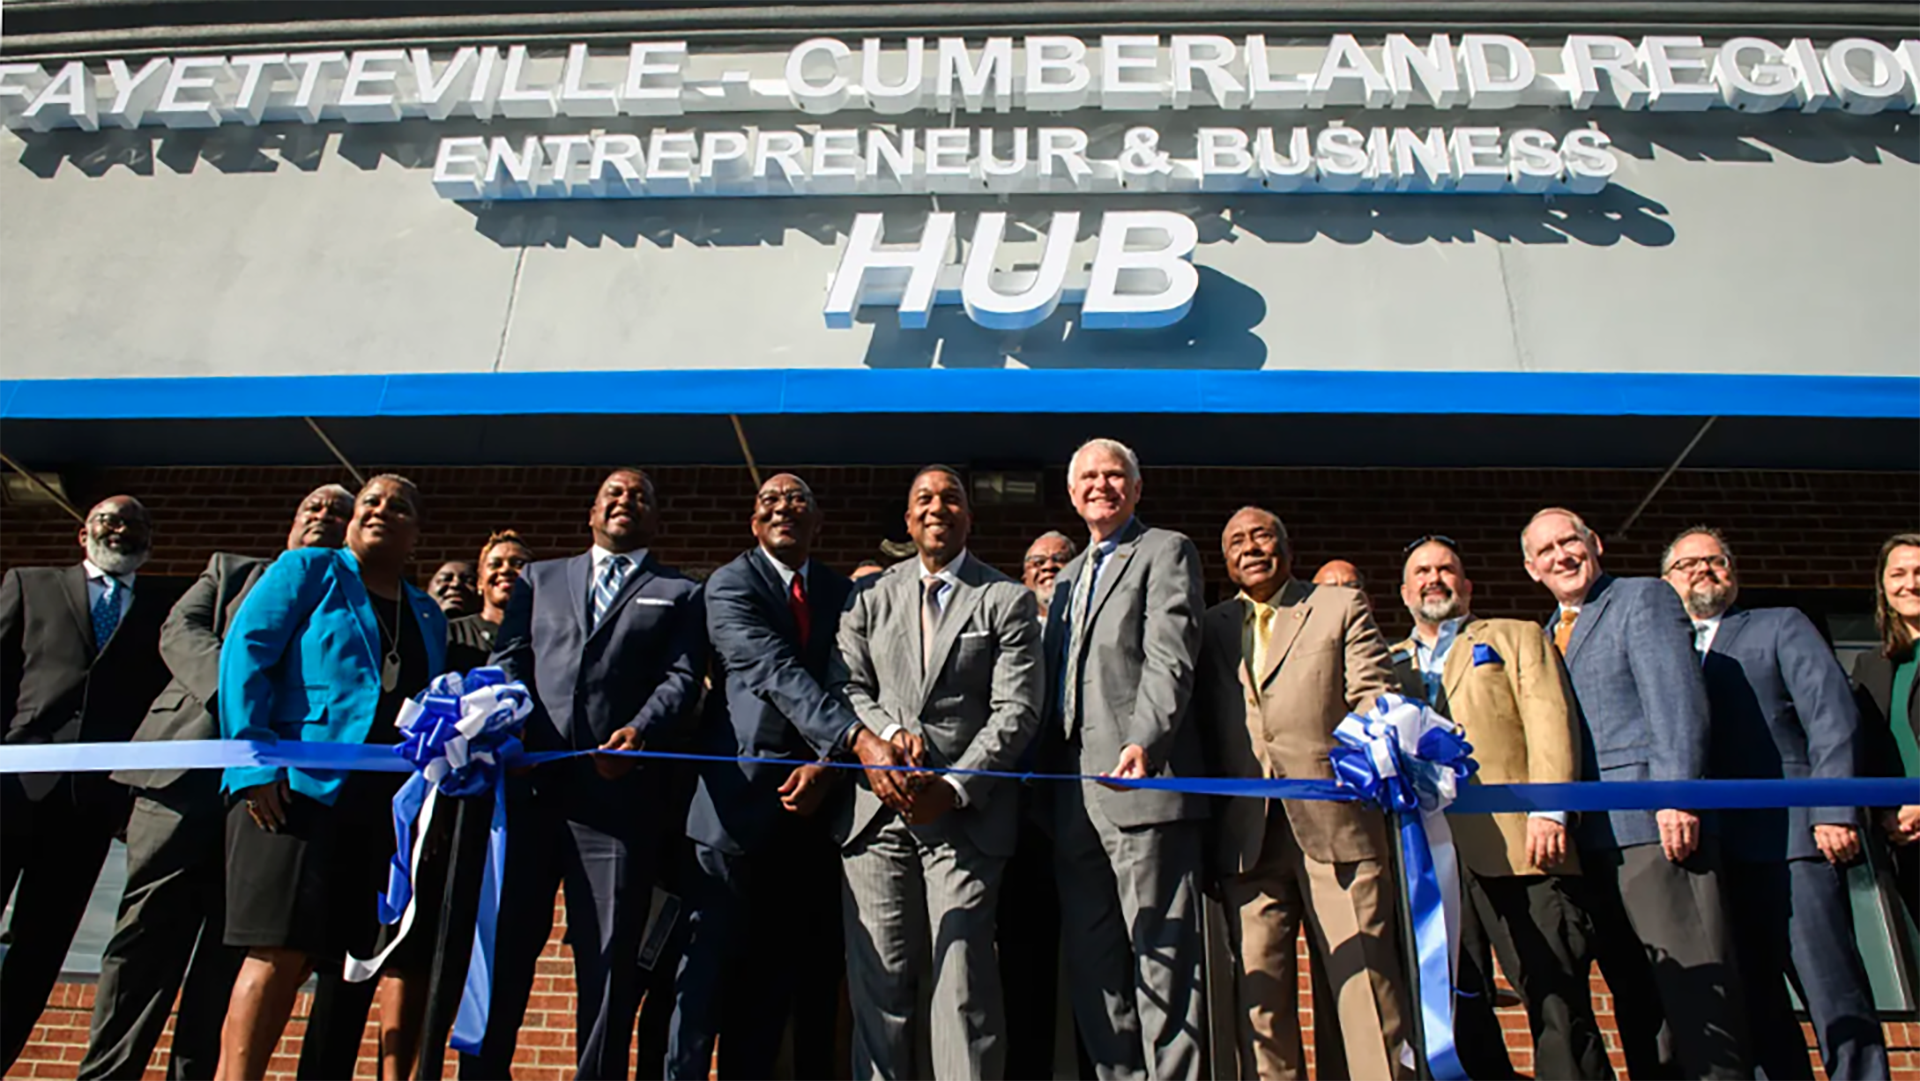 A group of people in suits are cutting a blue ribbon in front of a building that has the words Fayetteville-Cumberland Regional Entrepreneur and Business hub